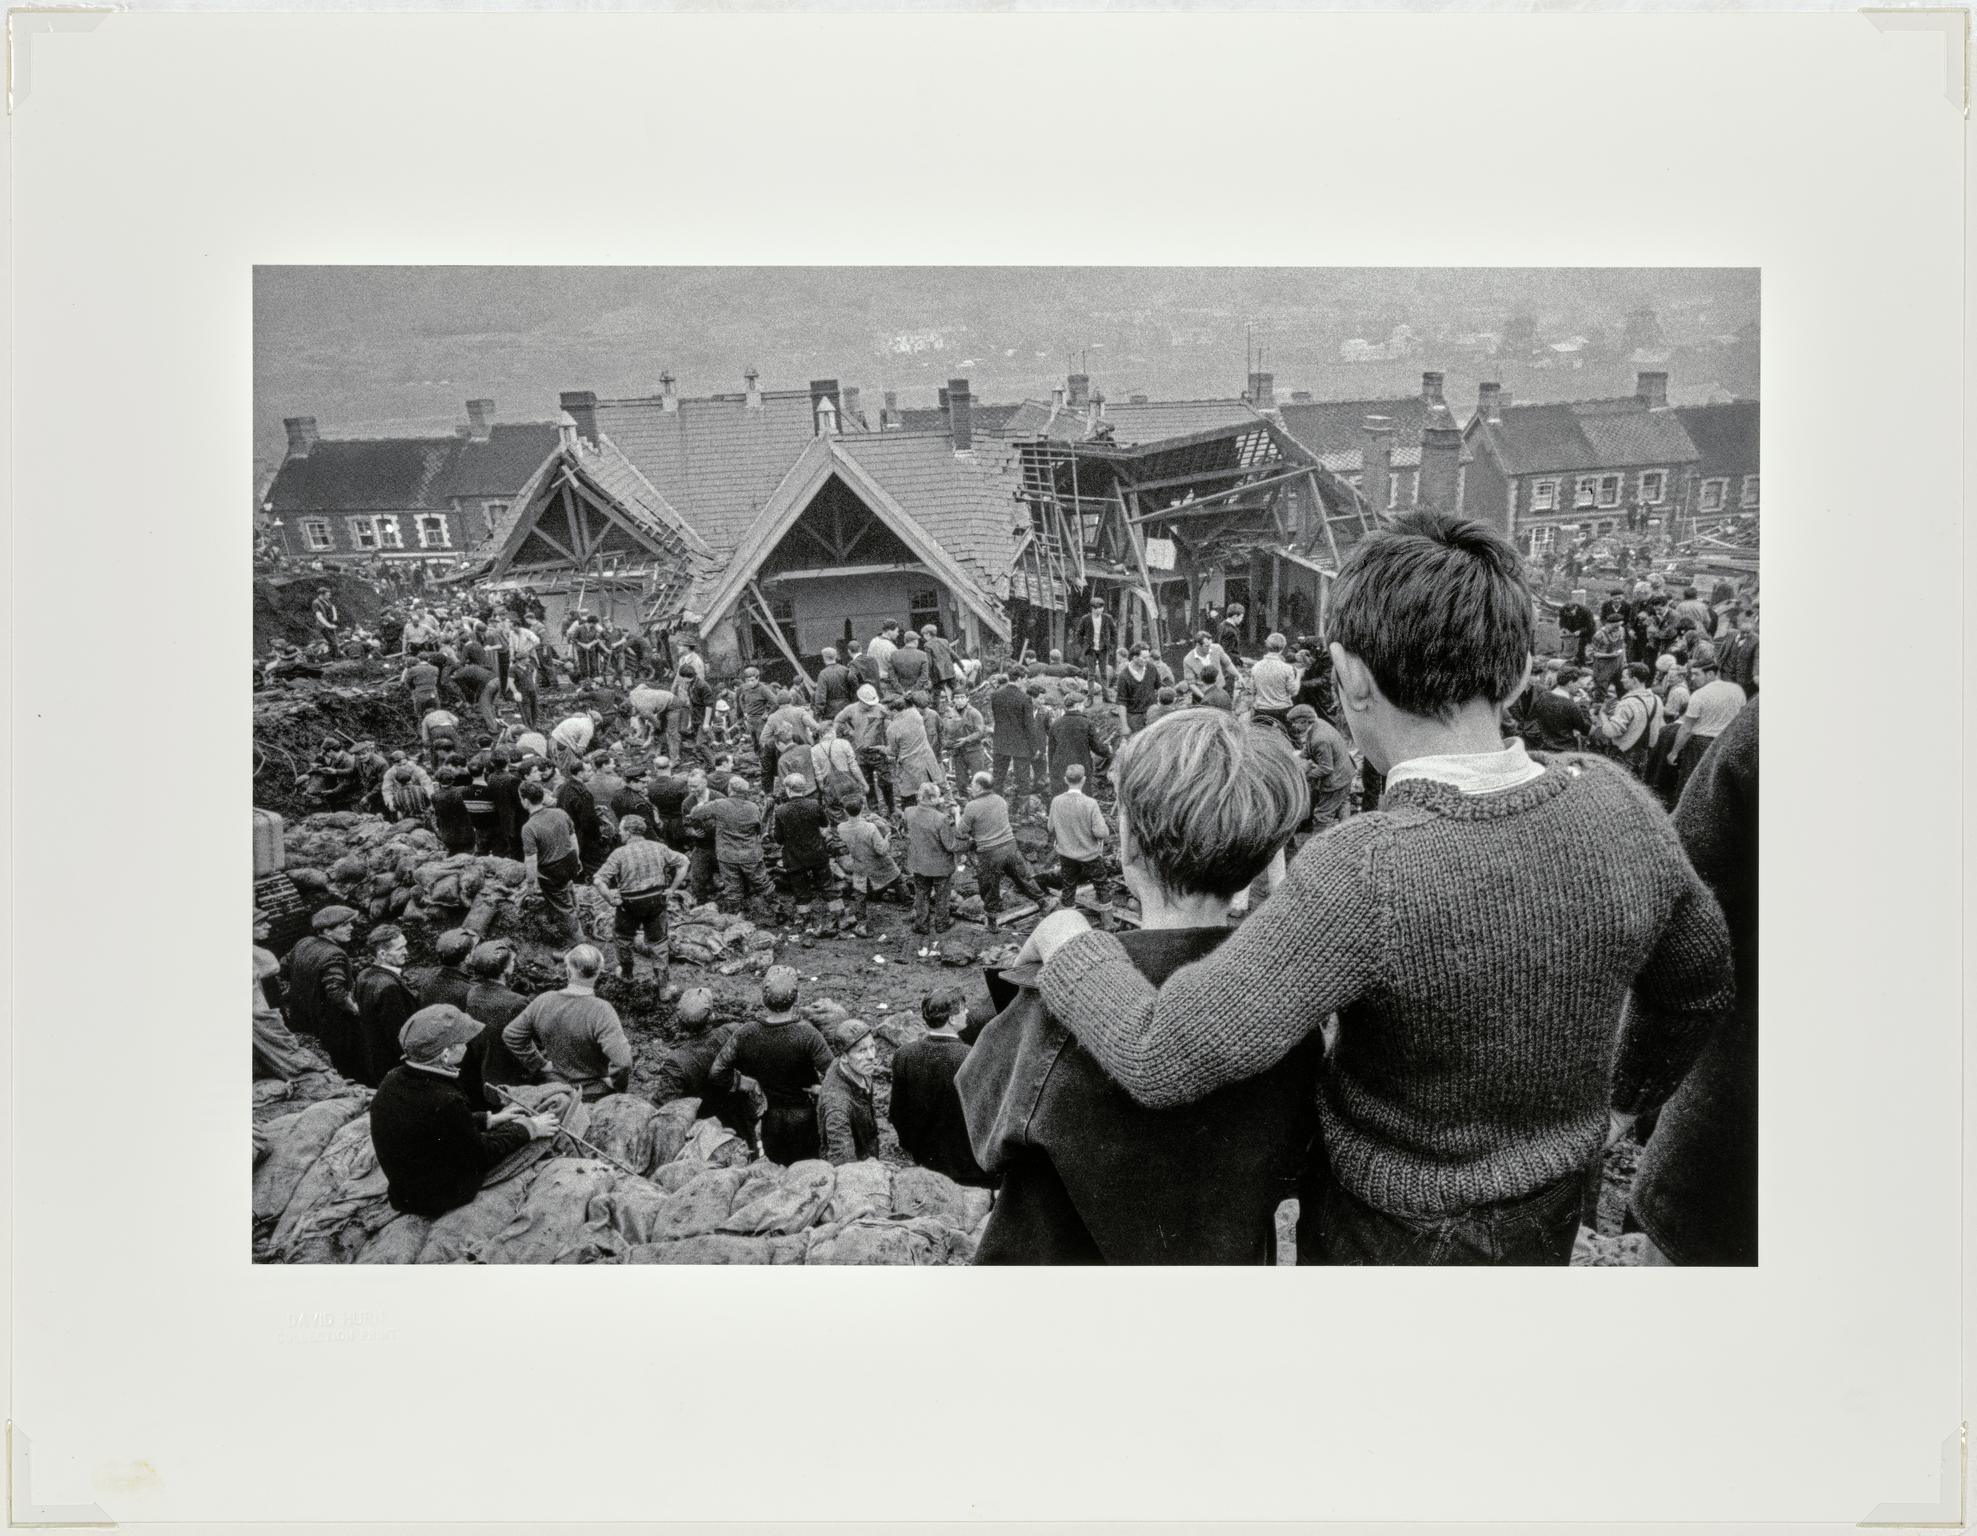 Aberfan Coal Slip Disaster. Two surviving children stand at the top of the hill overlooking the miners digging to find children still buried in the slag